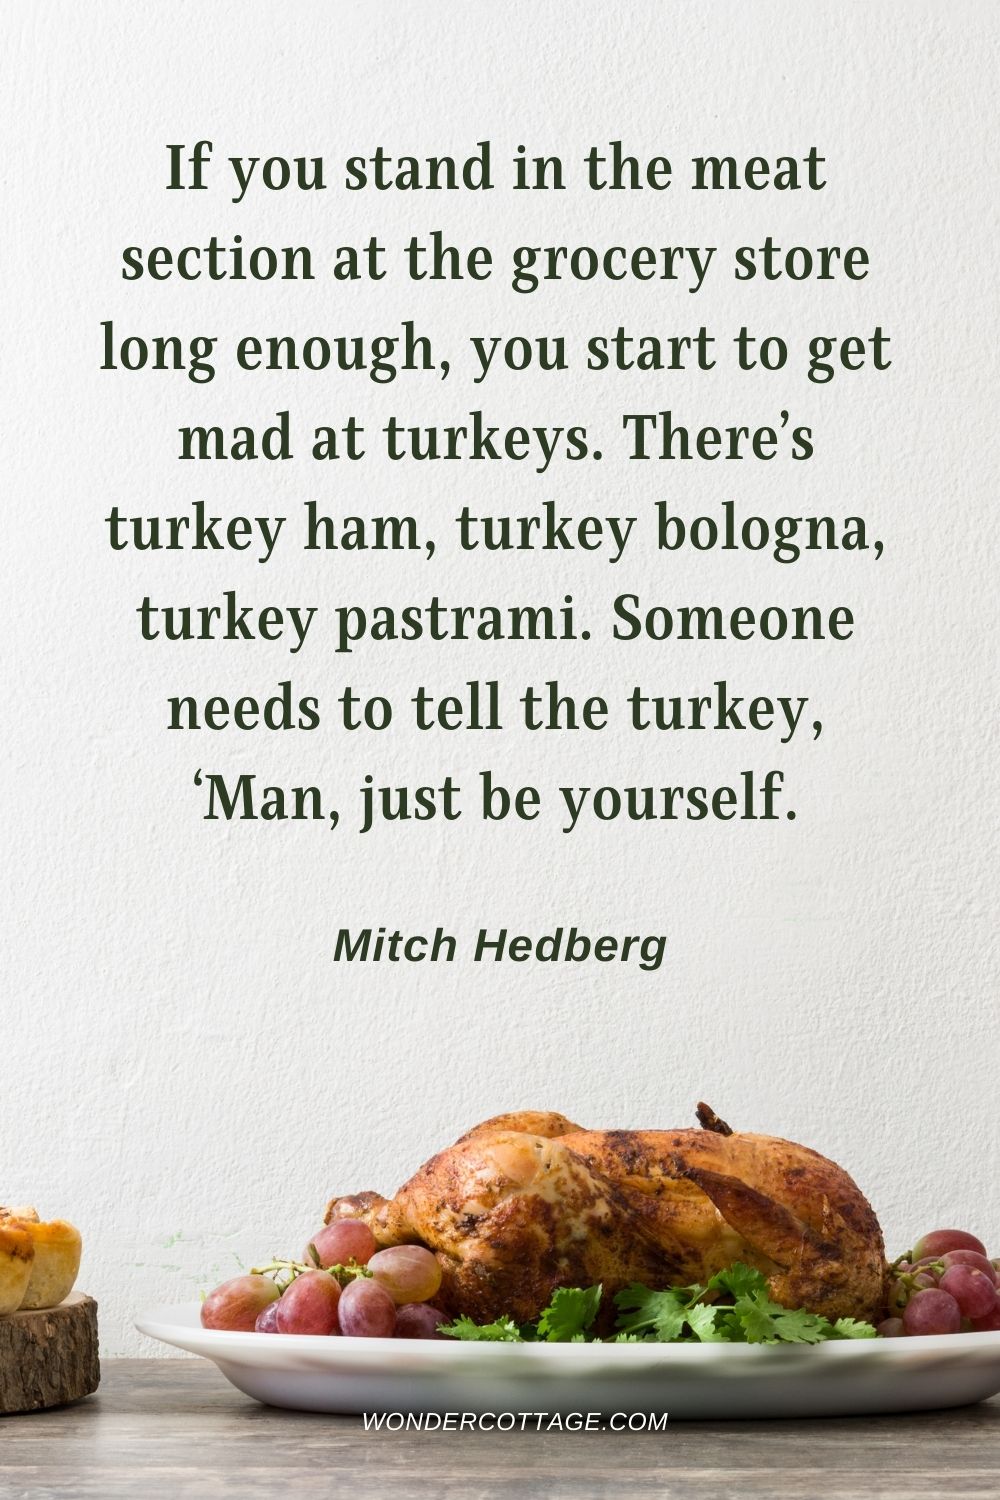 If you stand in the meat section at the grocery store long enough, you start to get mad at turkeys. There’s turkey ham, turkey bologna, turkey pastrami. Someone needs to tell the turkey, ‘Man, just be yourself. Mitch Hedberg